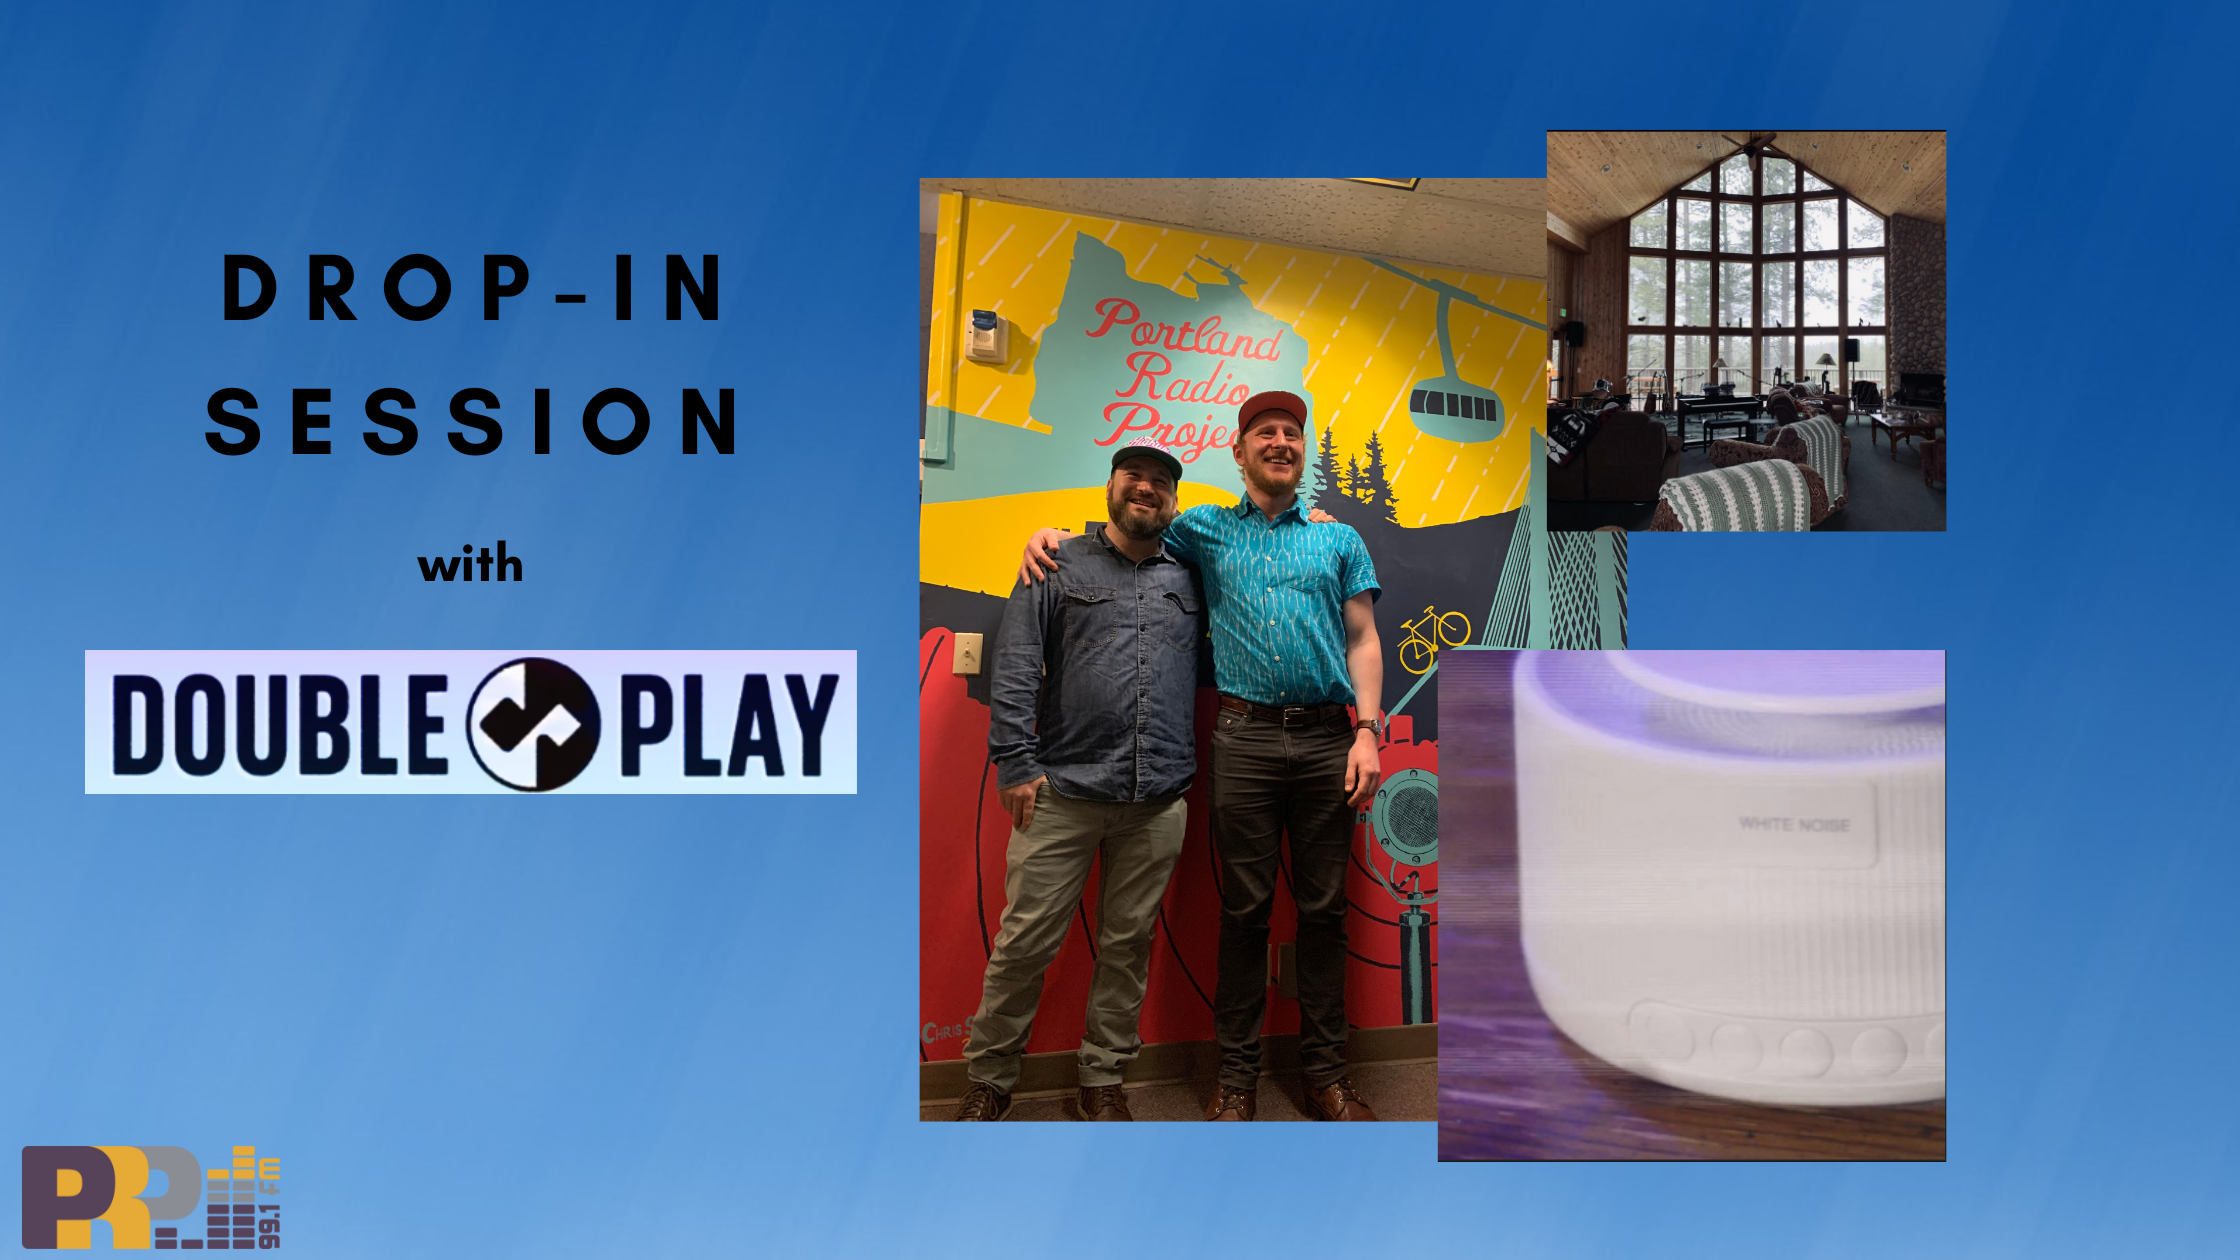 Drop-in Session with DoublePlay